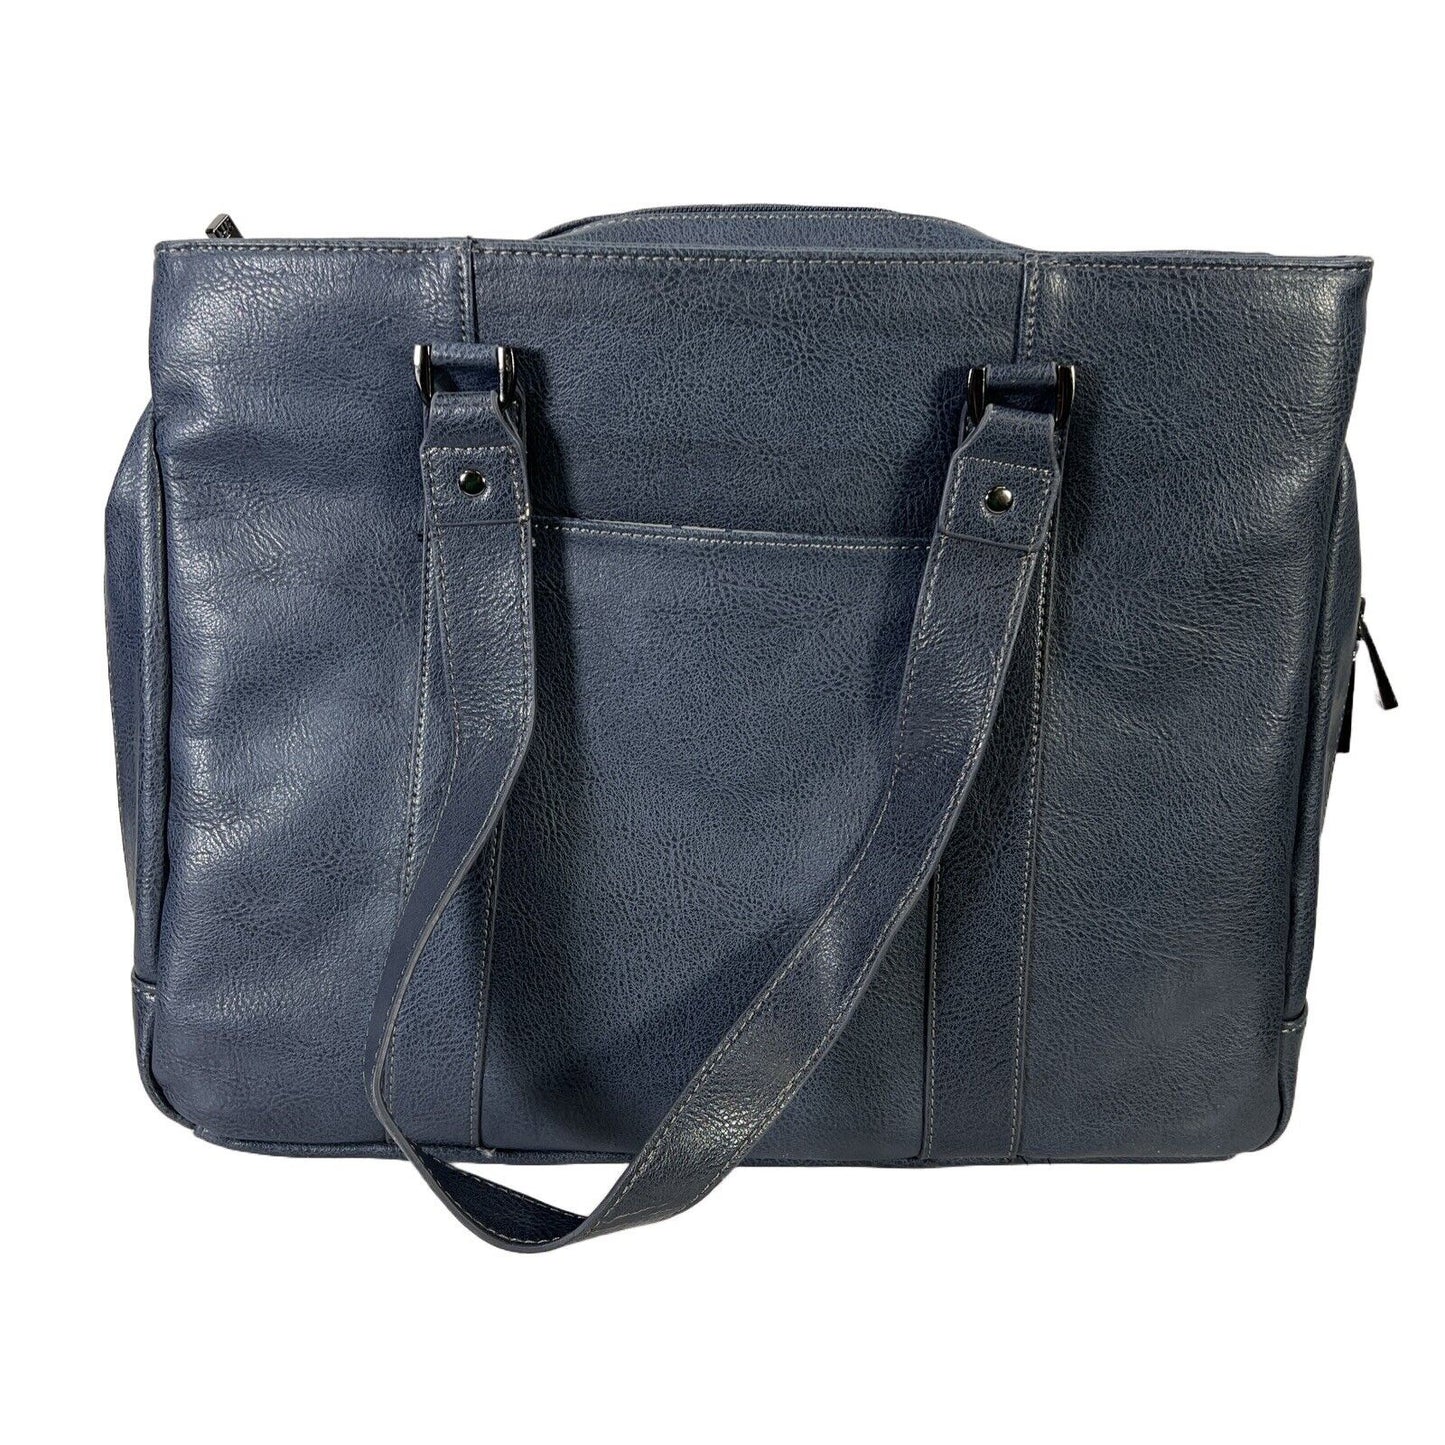 NEW Kenneth Cole Reaction Blue Commuter Tote Brief Bag